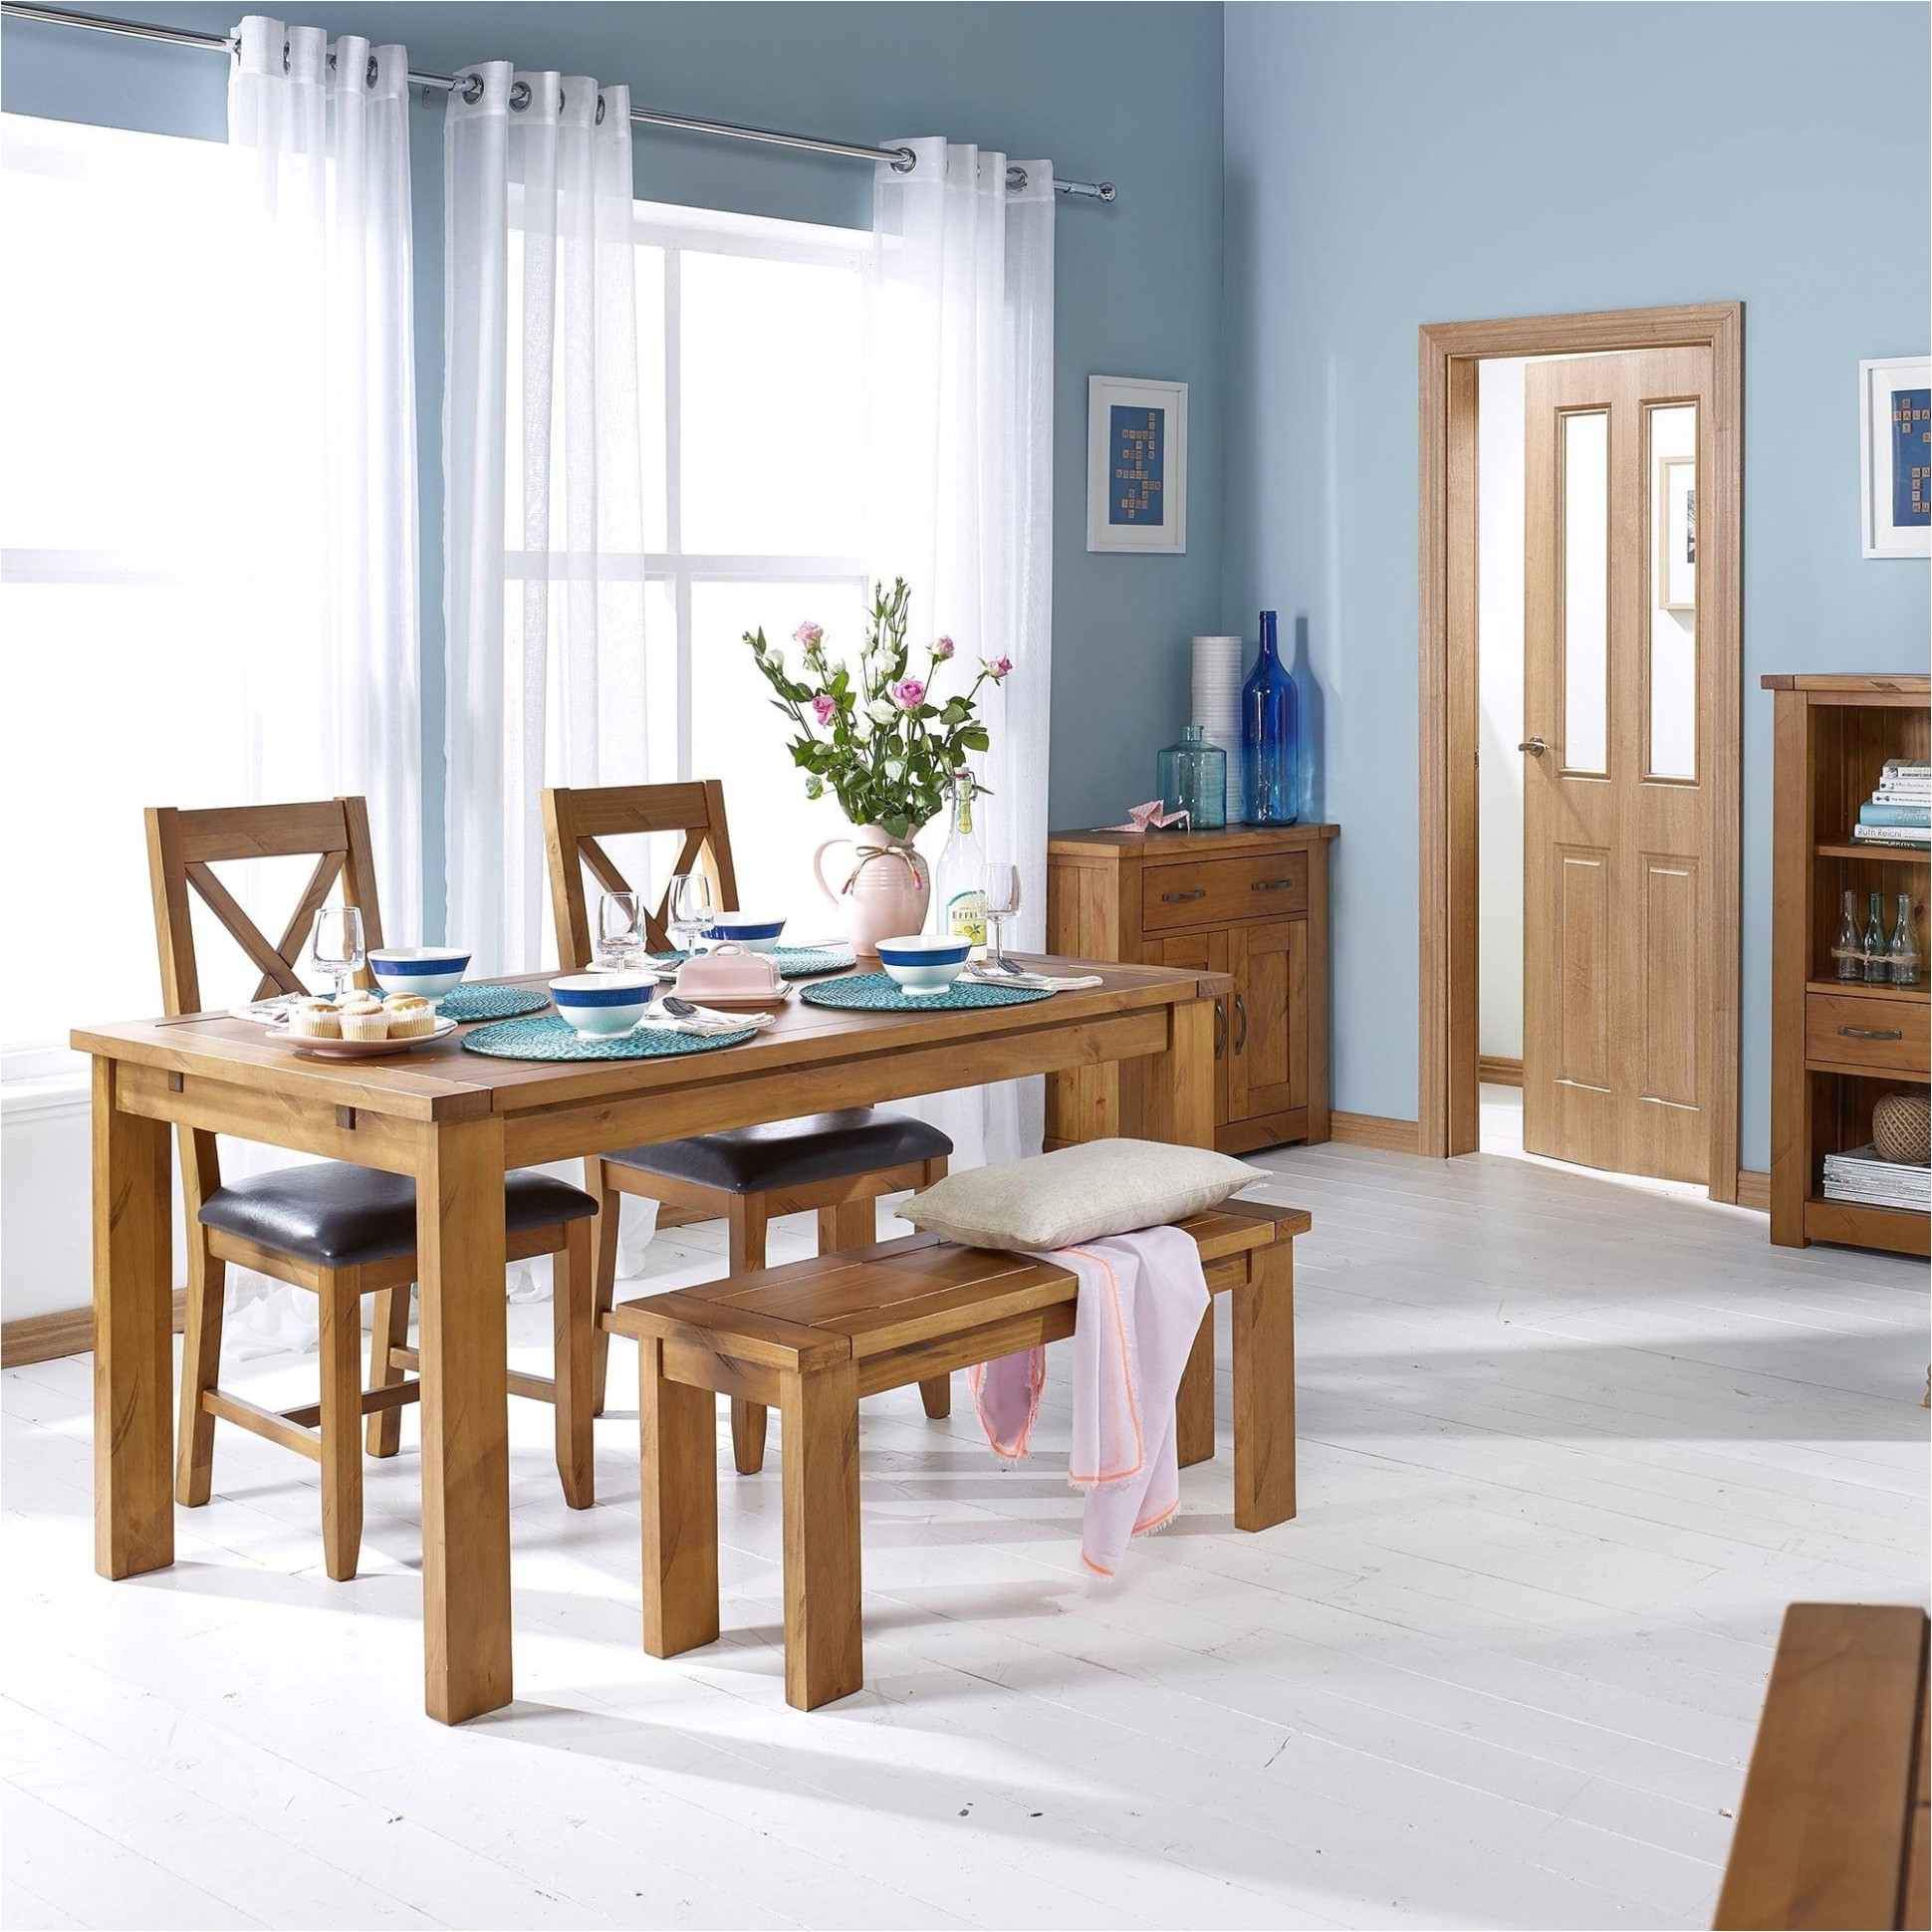 kitchen and dining room chairs popular kitchen and dining room furniture beautiful jadalnia od jafra